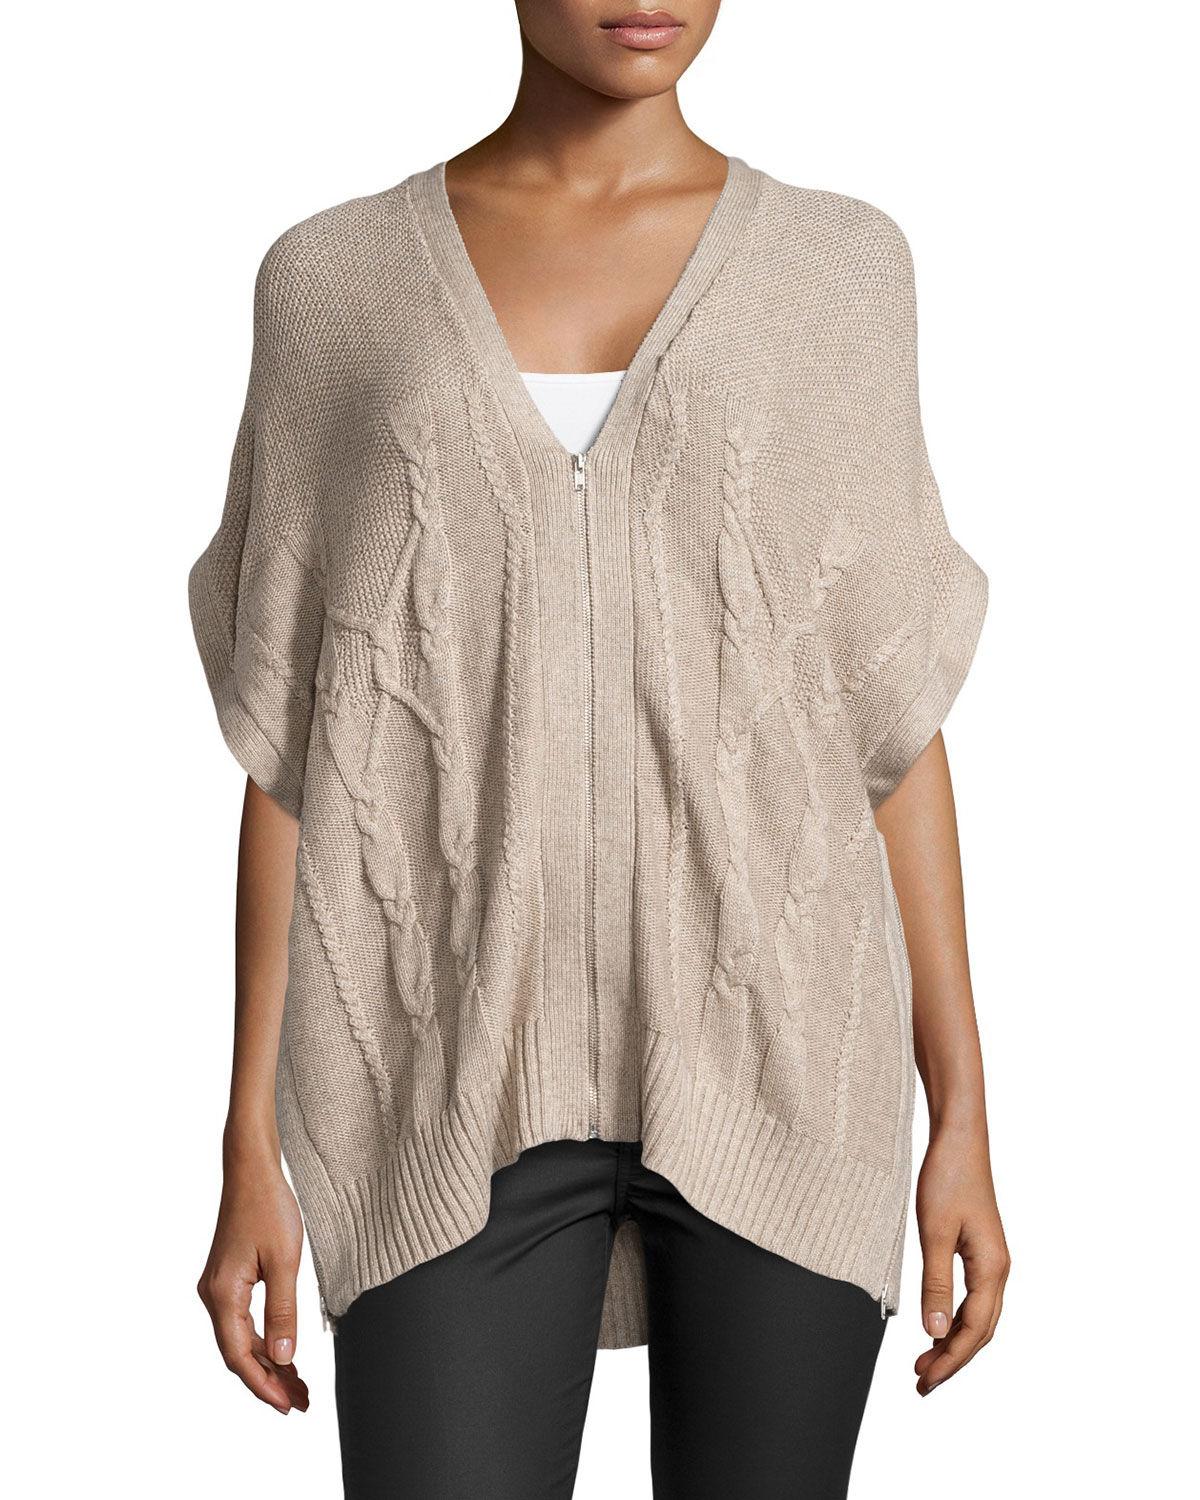 Lyst Love Scarlett Cableknit Zipup Poncho in Natural